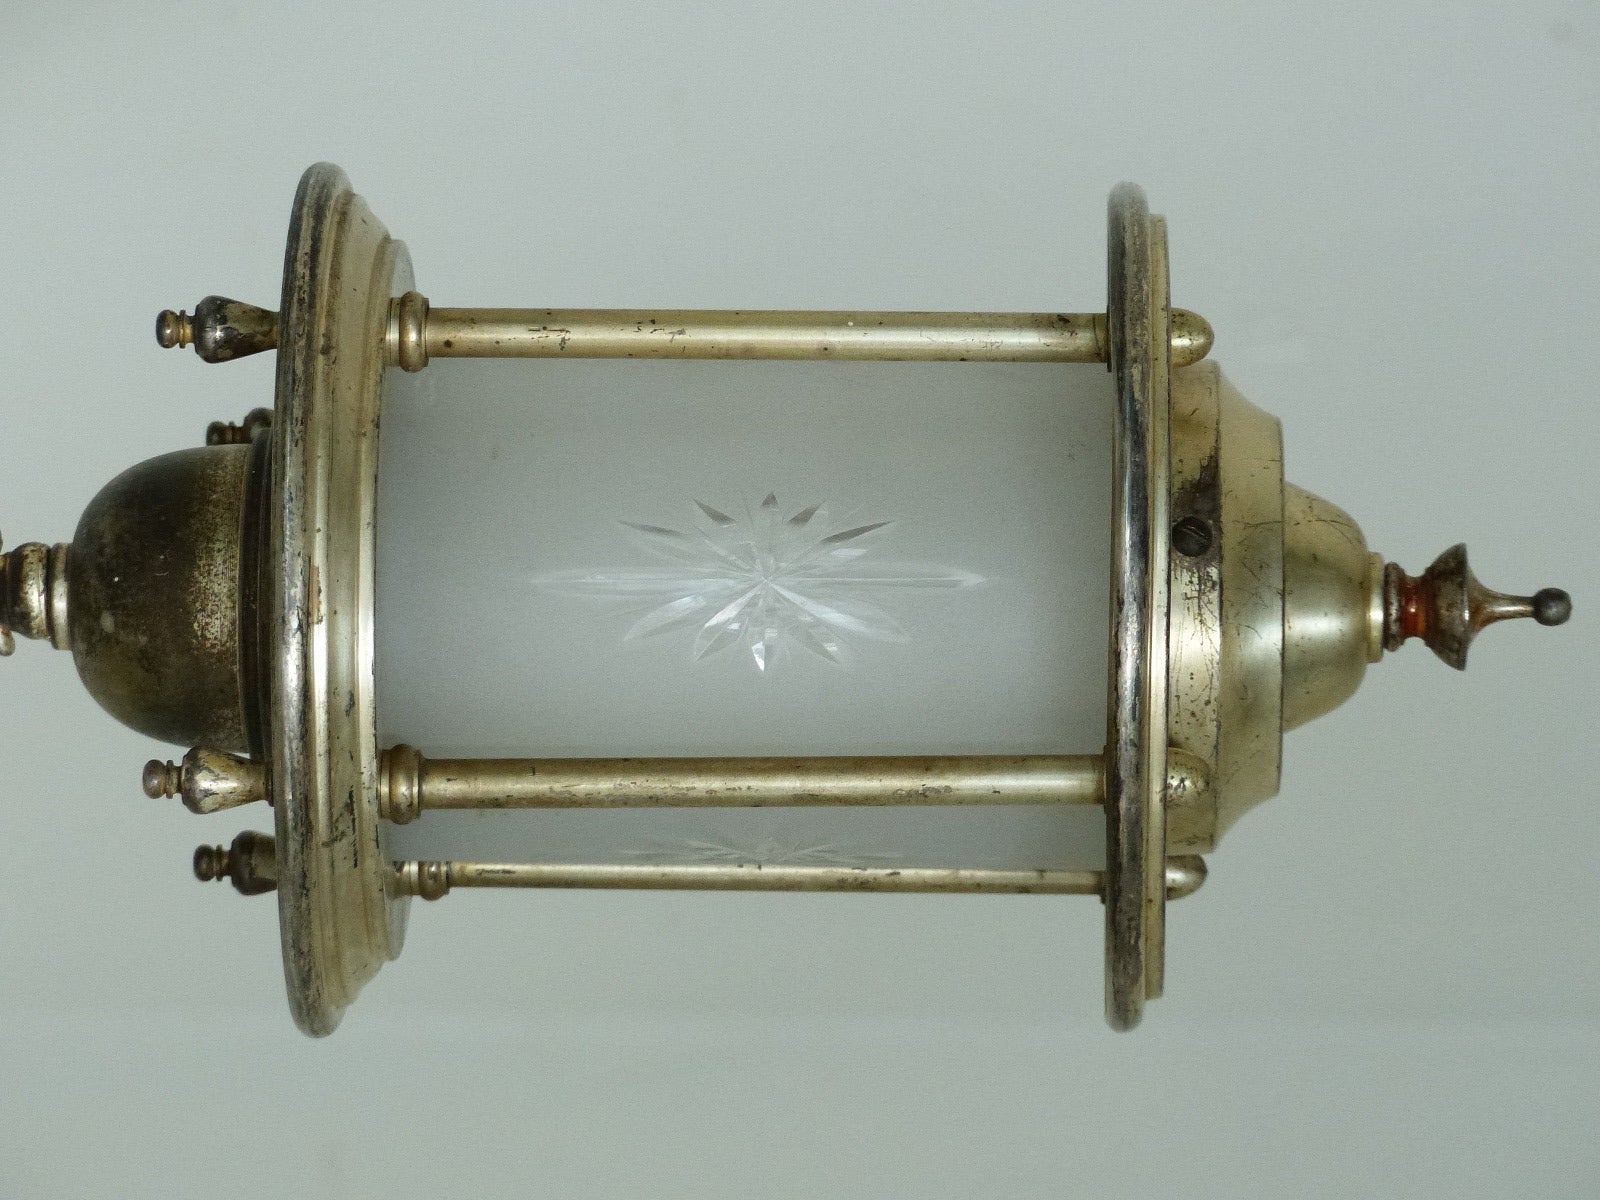 Nice original small pendant light with silver gilding. Re-wired and CSA approved. Found in NYC.